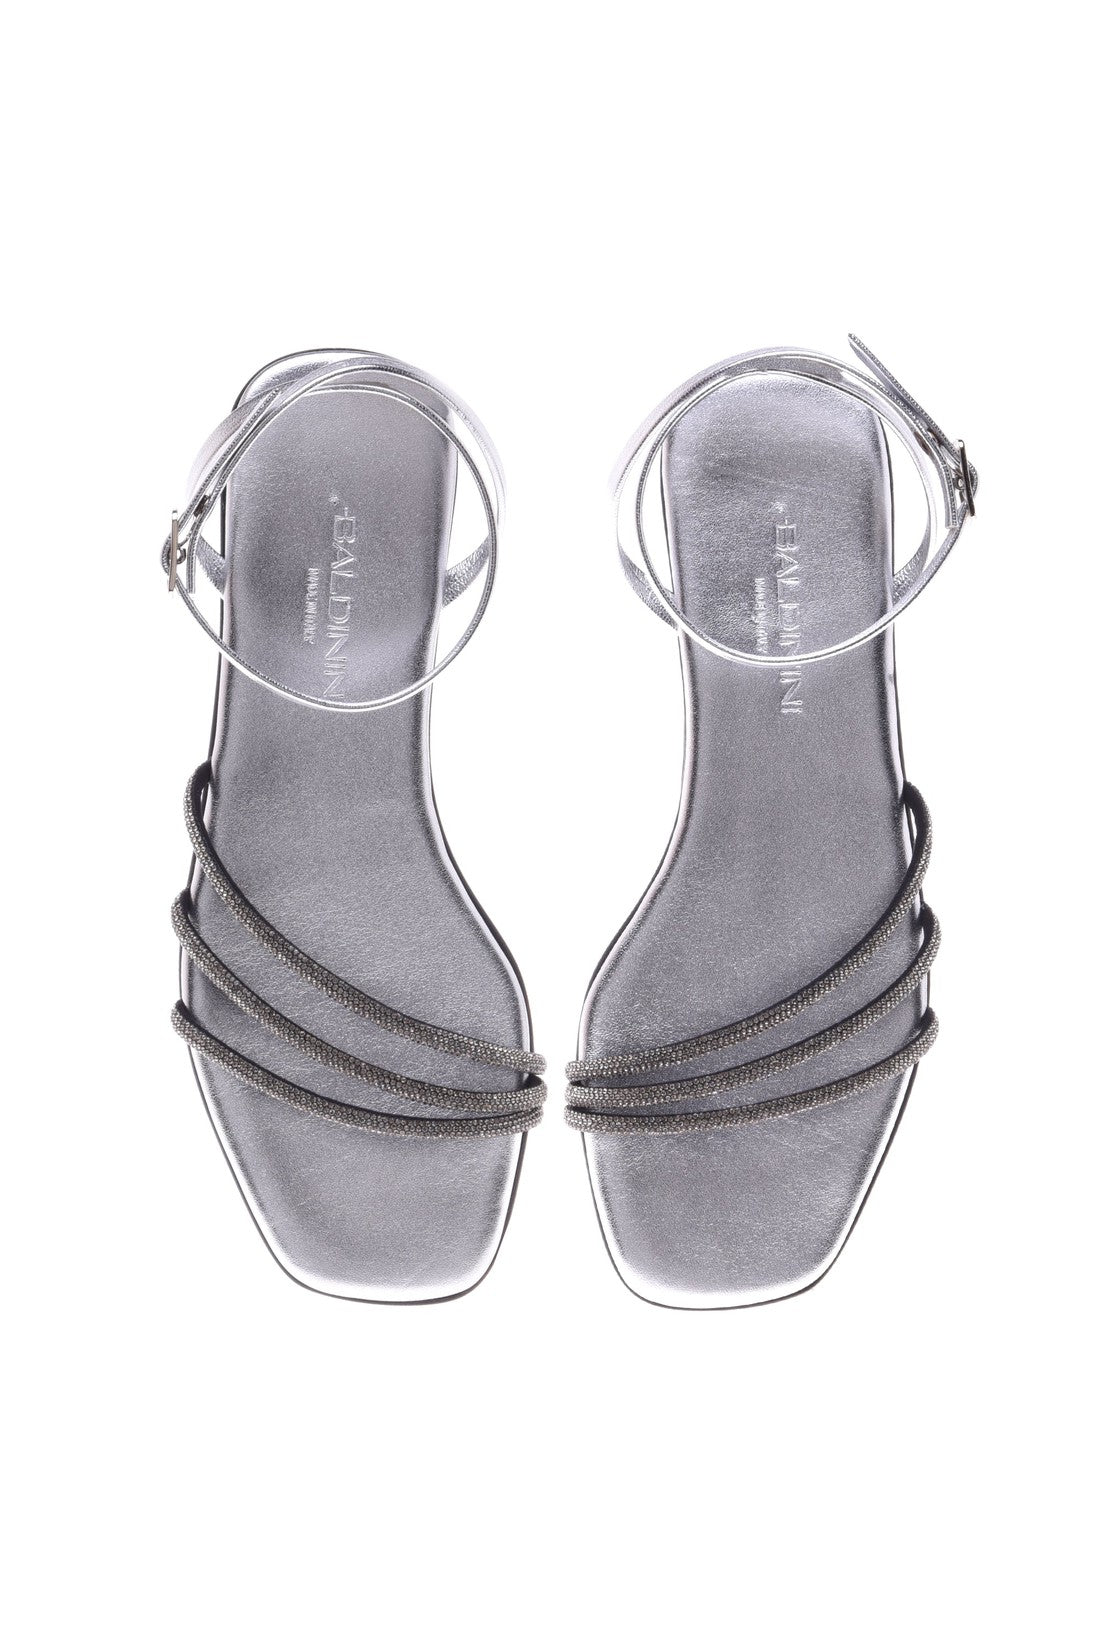 BALDININI-OUTLET-SALE-Sandal-in-silver-laminated-nappa-leather-Sandalen-ARCHIVE-COLLECTION-2.jpg